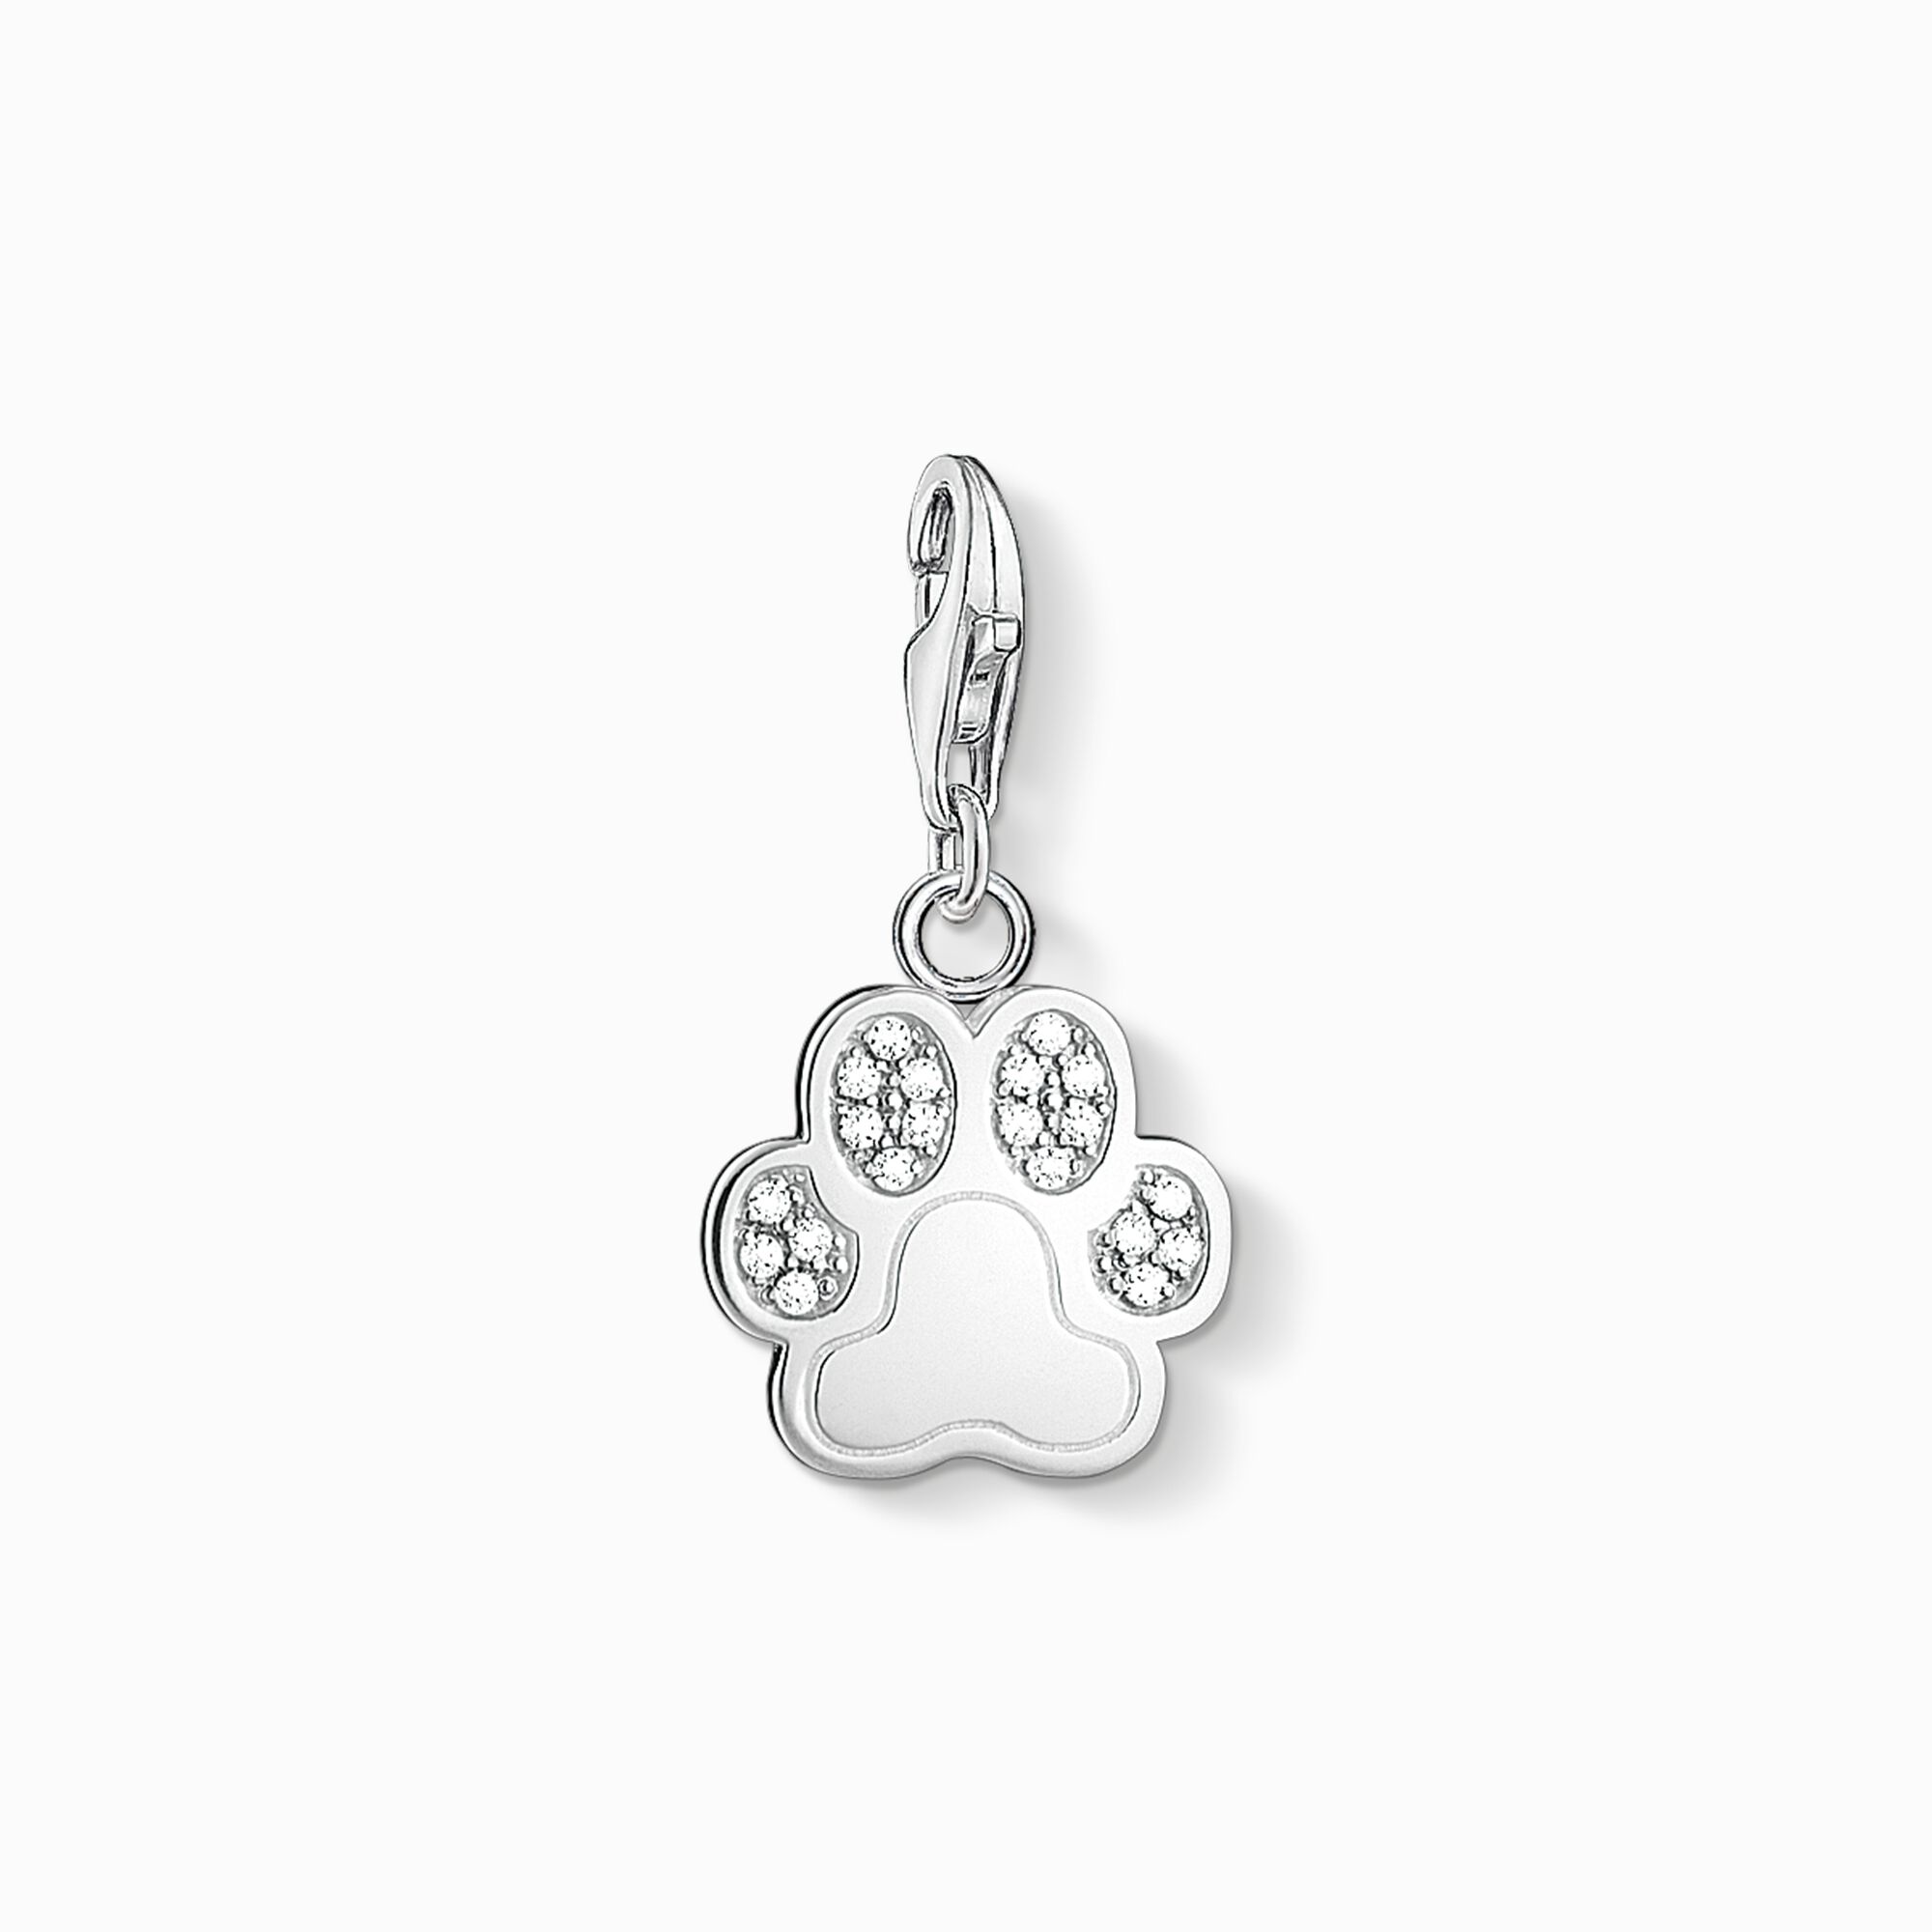 Charm pendant paw from the Charm Club collection in the THOMAS SABO online store